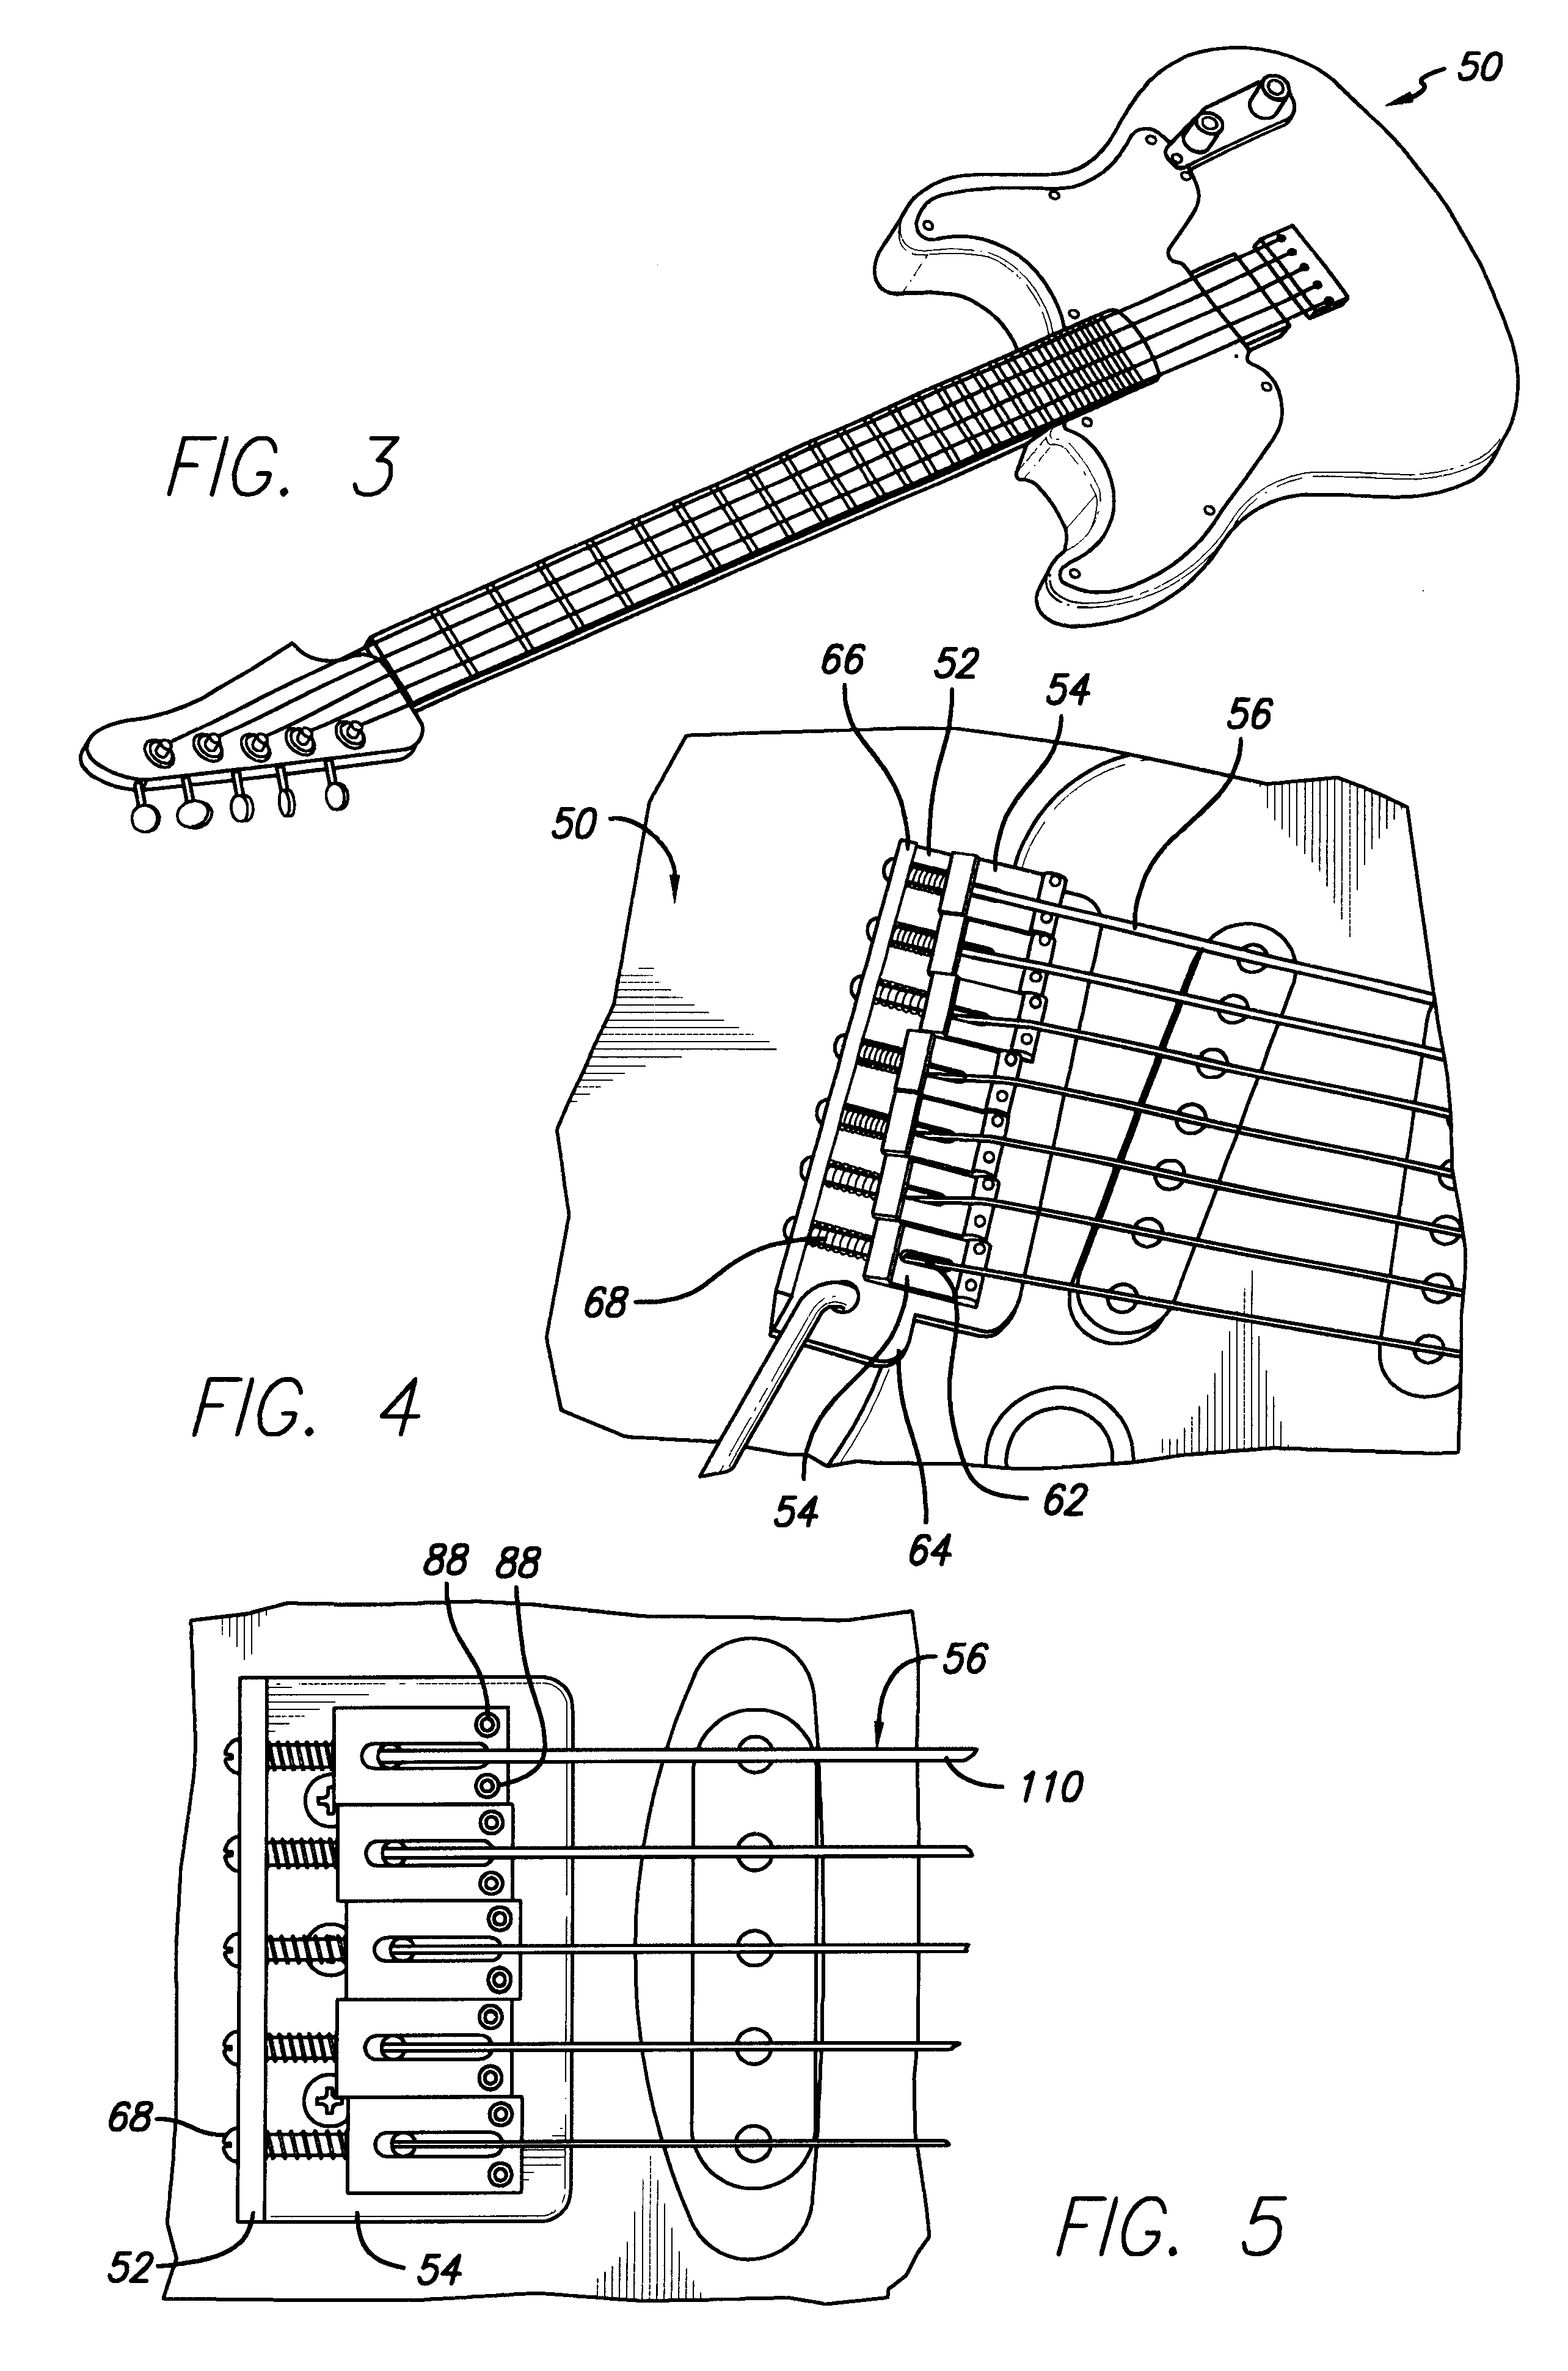 Stringed musical instruments and method therefor